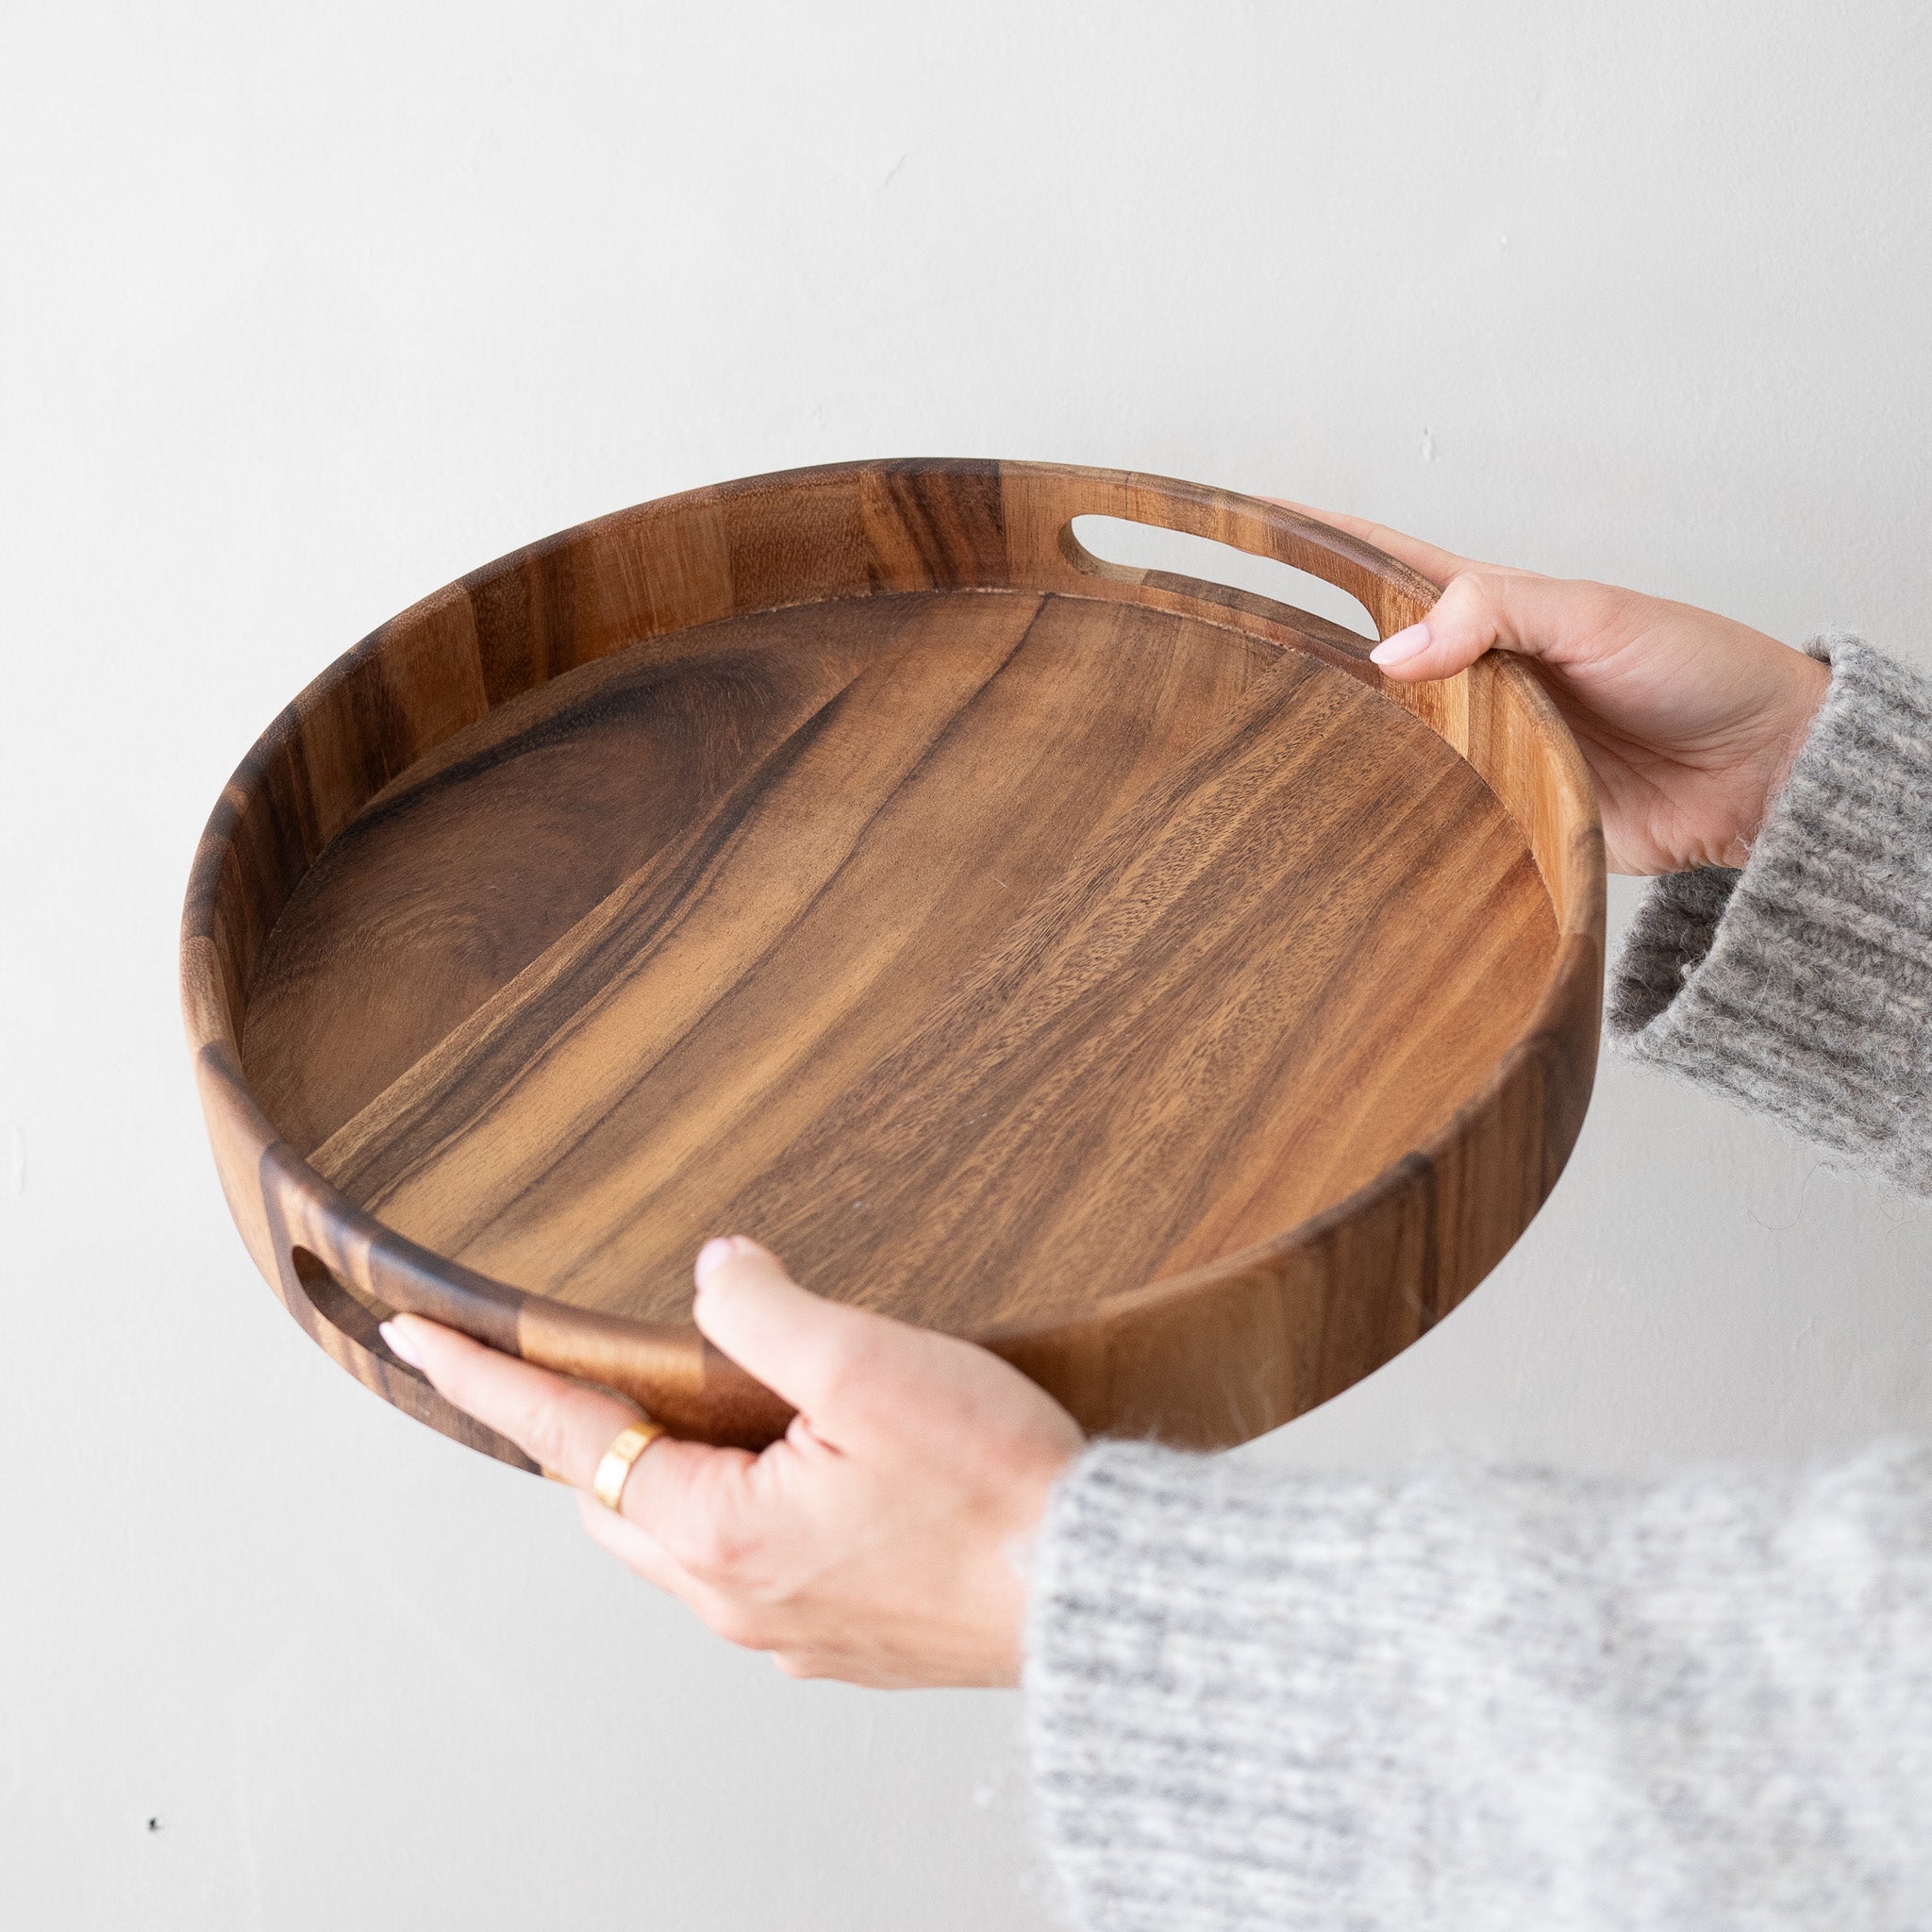 Round Tray with Handles